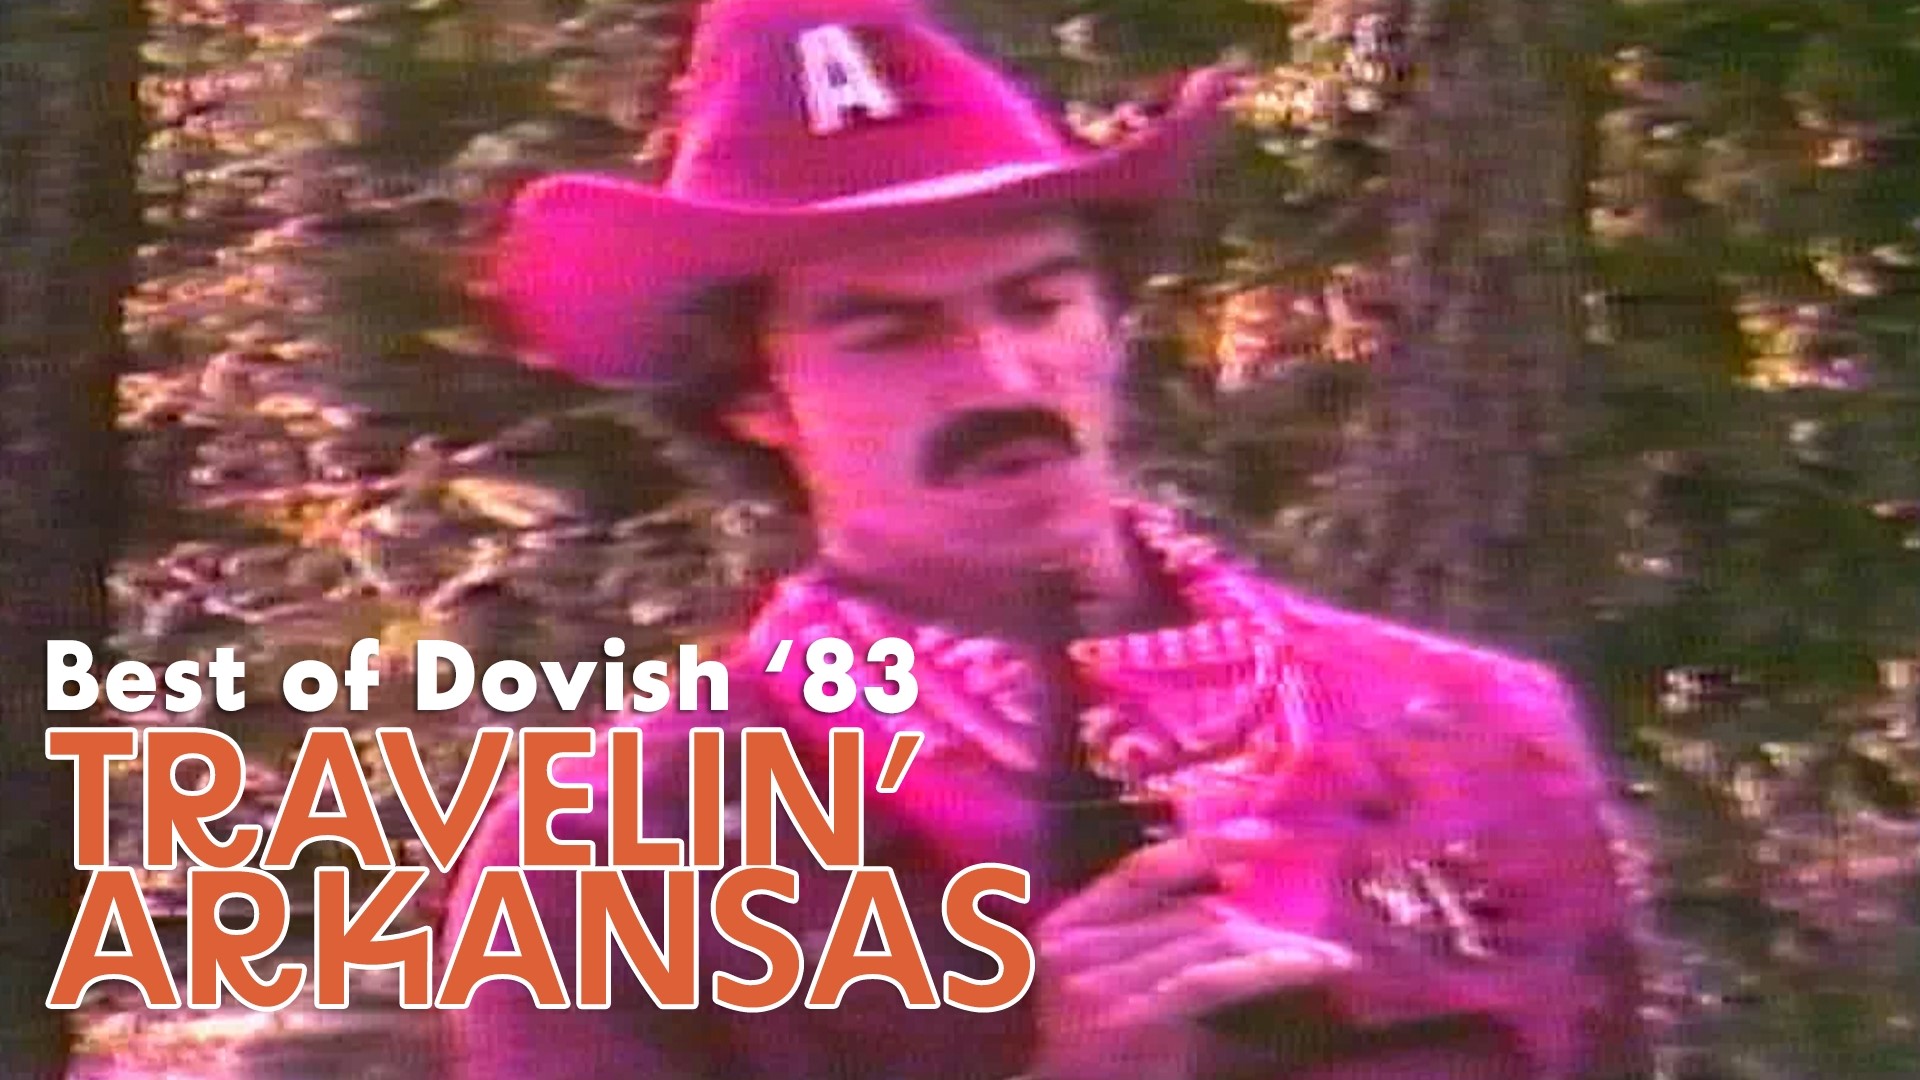 For 25 years, Chuck Dovish made Travelin' Arkansas for THV11. Enjoy this special from 1983, featuring the Razorback Kid, sorghum molasses, & and Ozark elders.